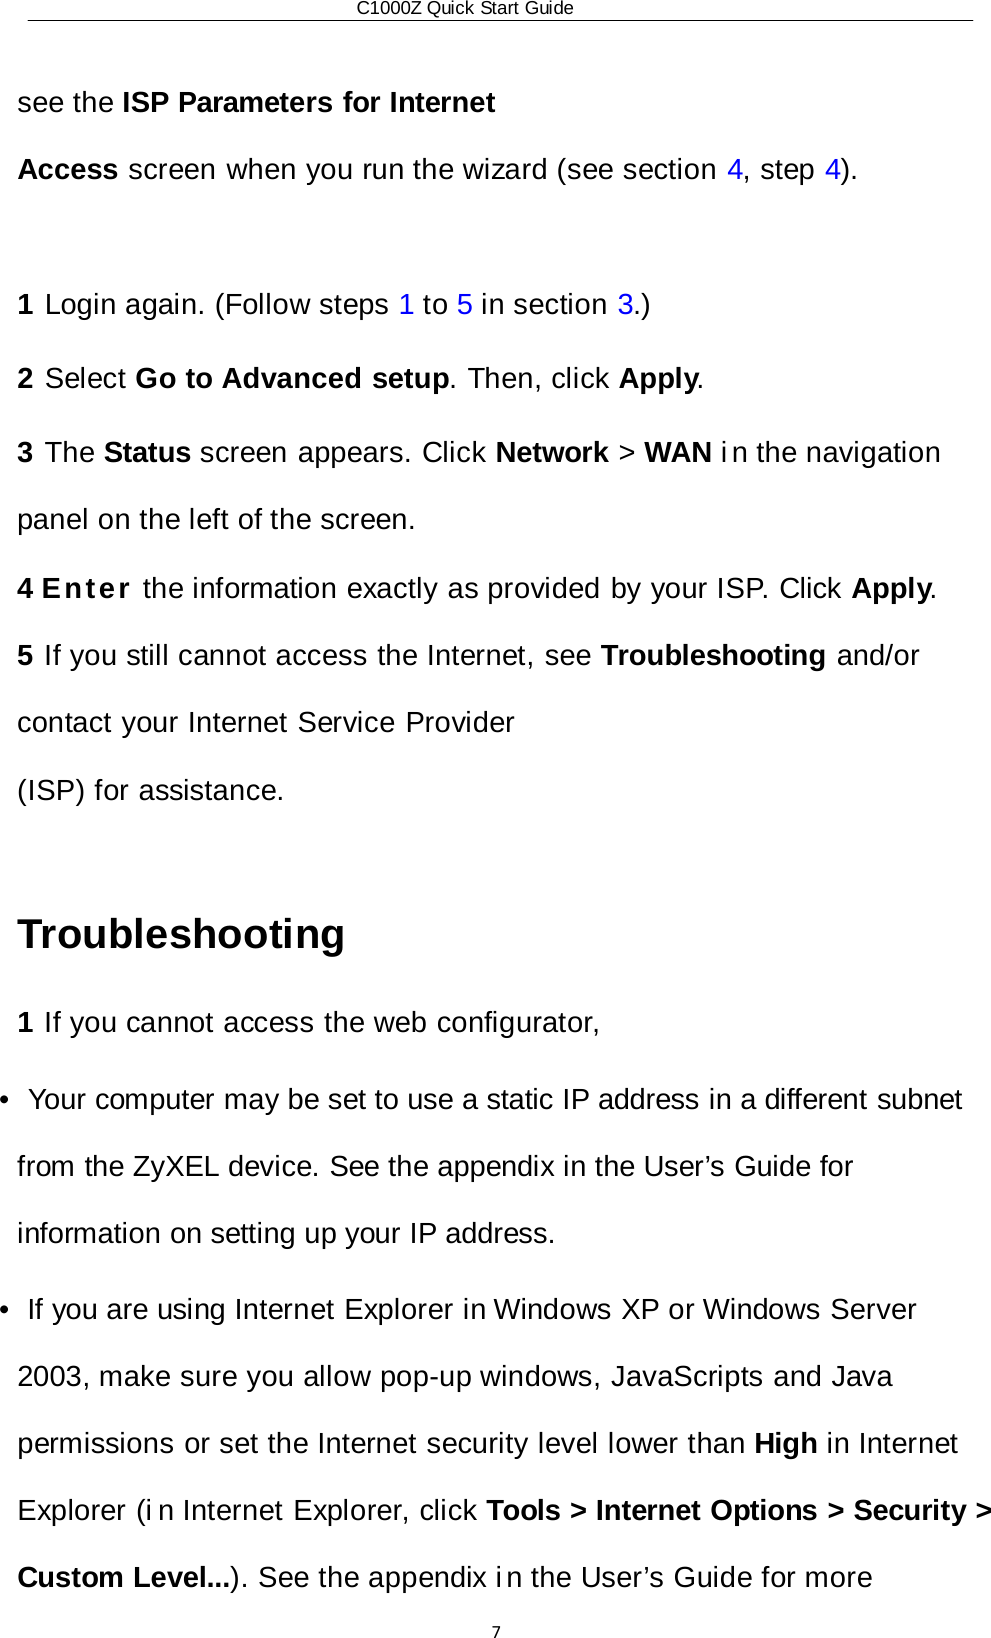 C1000Z Quick Start Guide7 see the ISP Parameters for Internet Access screen when you run the wizard (see section 4, step 4).  1 Login again. (Follow steps 1 to 5 in section 3.) 2 Select Go to Advanced setup. Then, click Apply. 3 The Status screen appears. Click Network &gt; WAN i n  the navigation panel on the left of the screen. 4 Enter the information exactly as provided by your ISP. Click Apply. 5 If you still cannot access the Internet, see Troubleshooting and/or contact your Internet Service Provider (ISP) for assistance.  Troubleshooting 1 If you cannot access the web configurator, •  Your computer may be set to use a static IP address in a different subnet from the ZyXEL device. See the appendix in the User’s Guide for information on setting up your IP address. •  If you are using Internet Explorer in Windows XP or Windows Server 2003, make sure you allow pop-up windows, JavaScripts and Java permissions or set the Internet security level lower than High in Internet Explorer (i n Internet Explorer, click Tools &gt; Internet Options &gt; Security &gt; Custom Level...). See the appendix i n the User’s Guide for more 